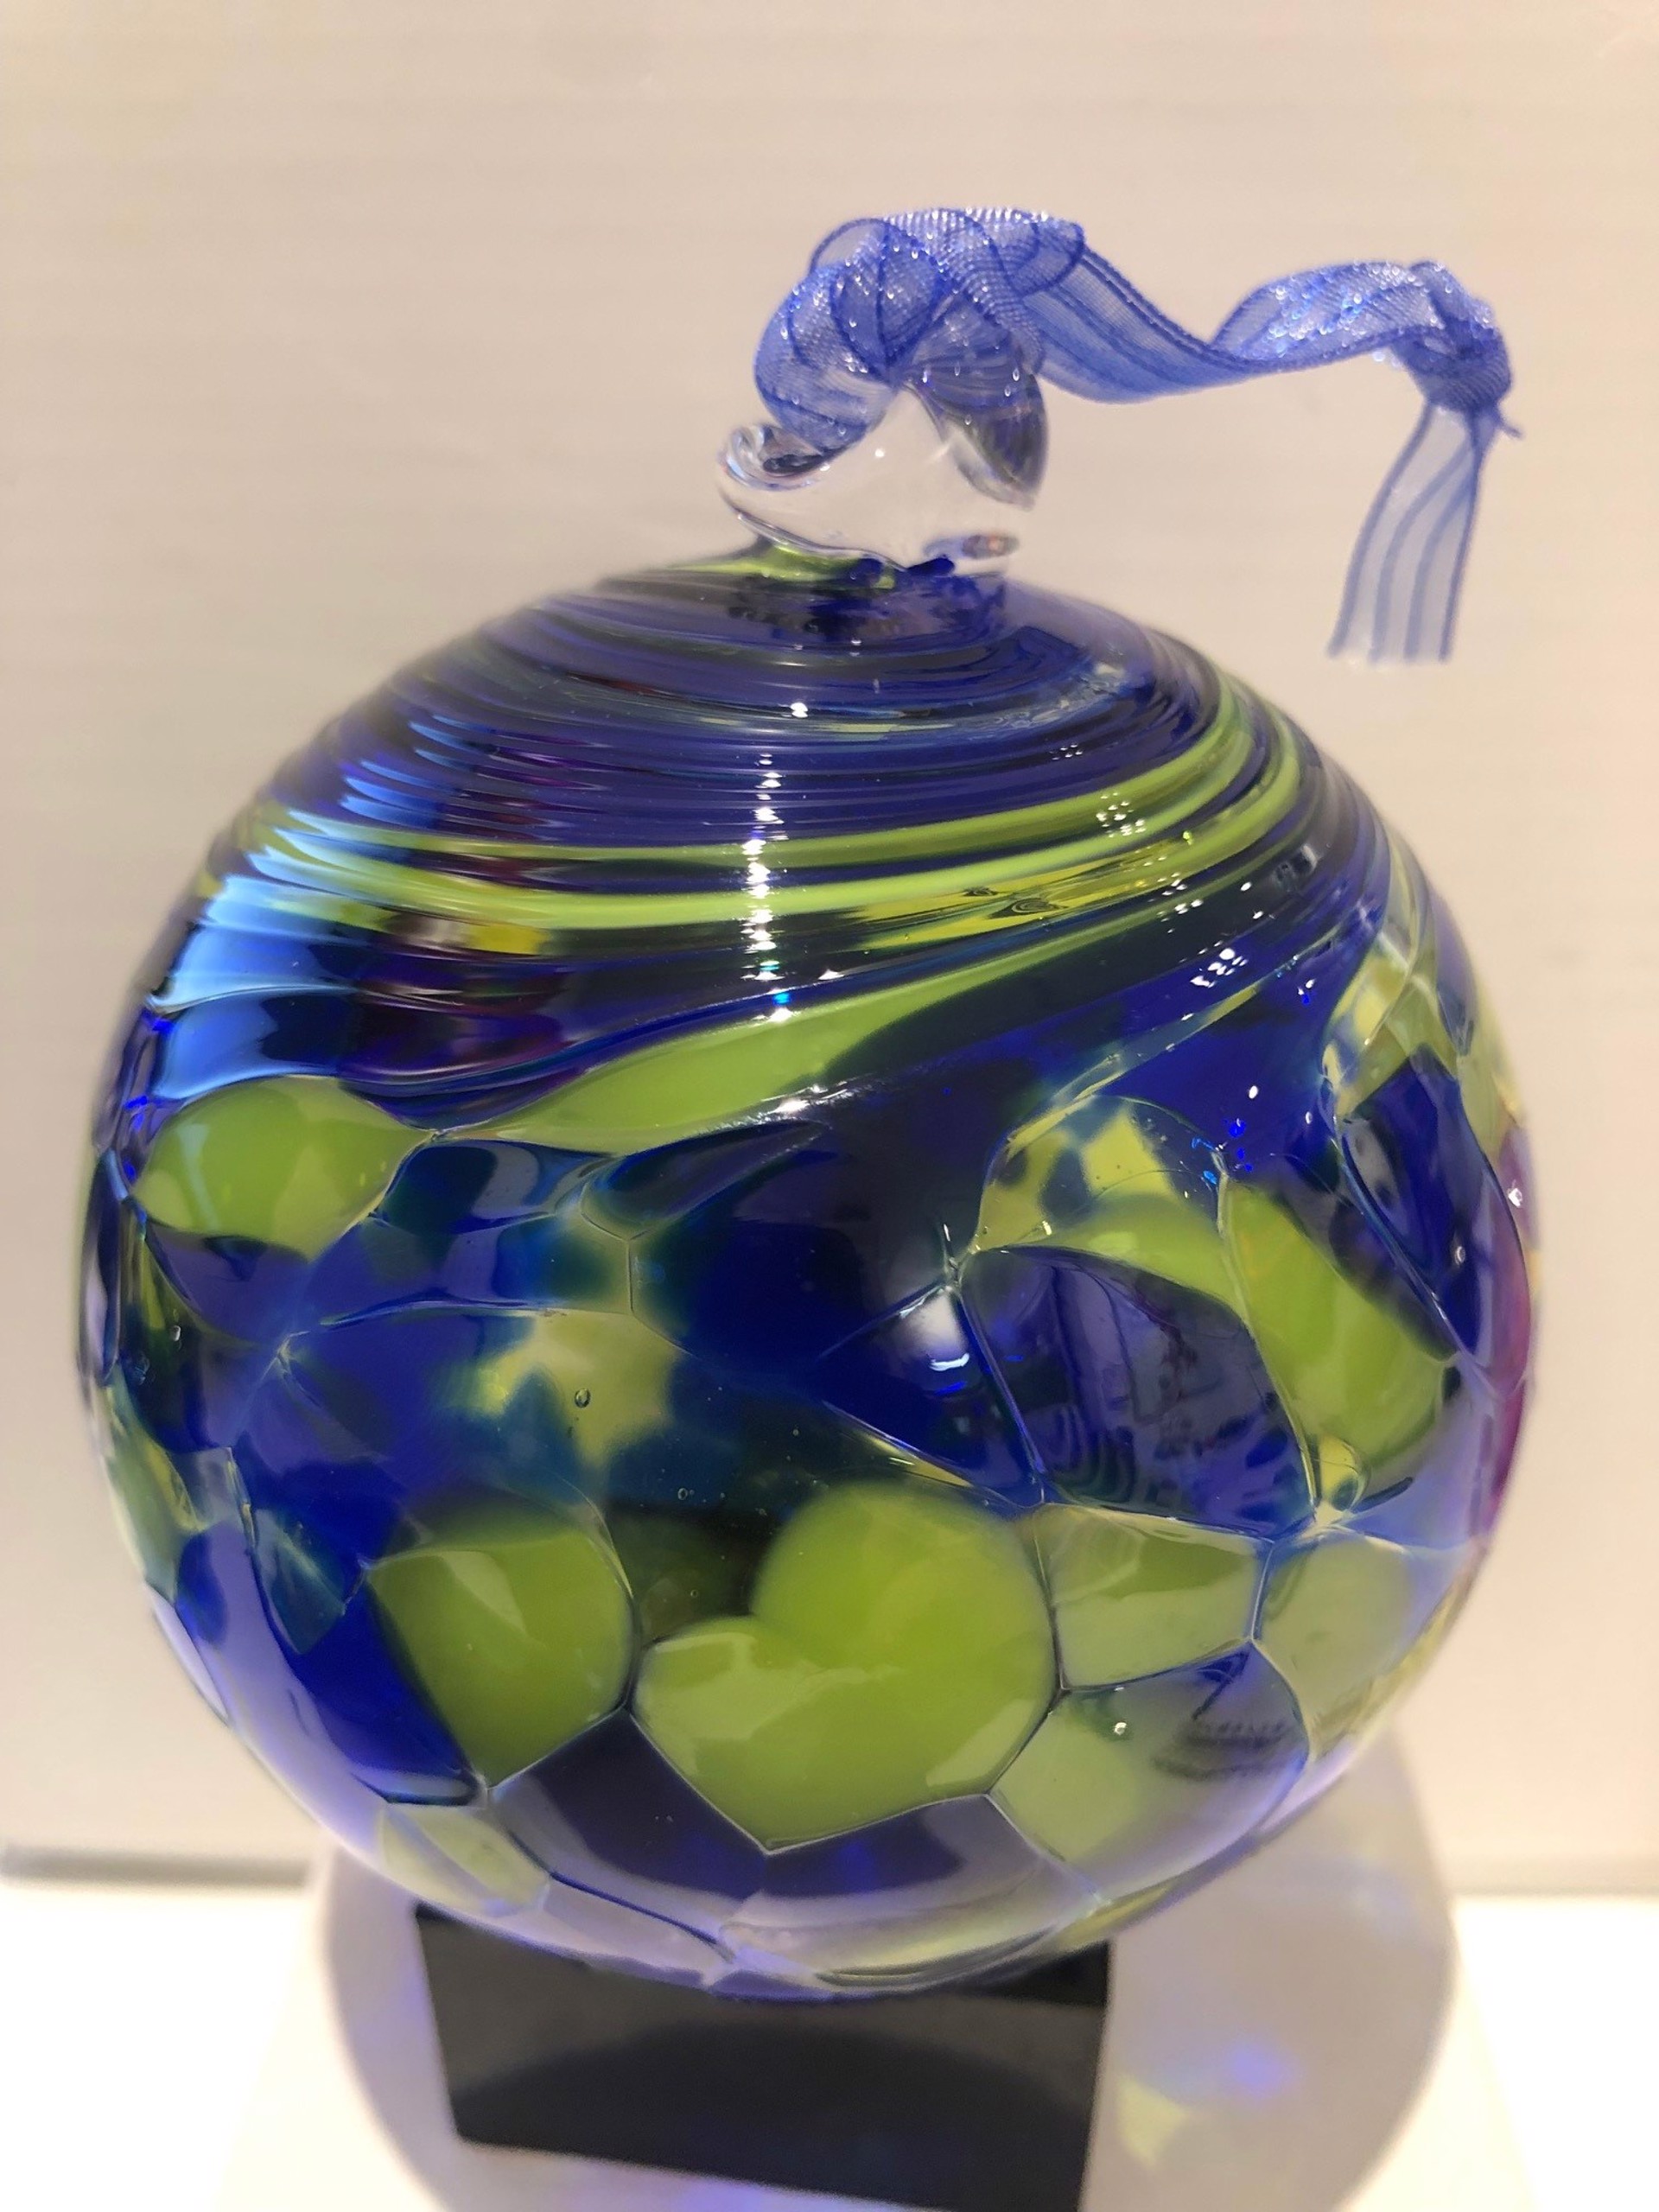 Swirled Speckled Friendship Ball - 203050 by Virginia Wilson Toccalino